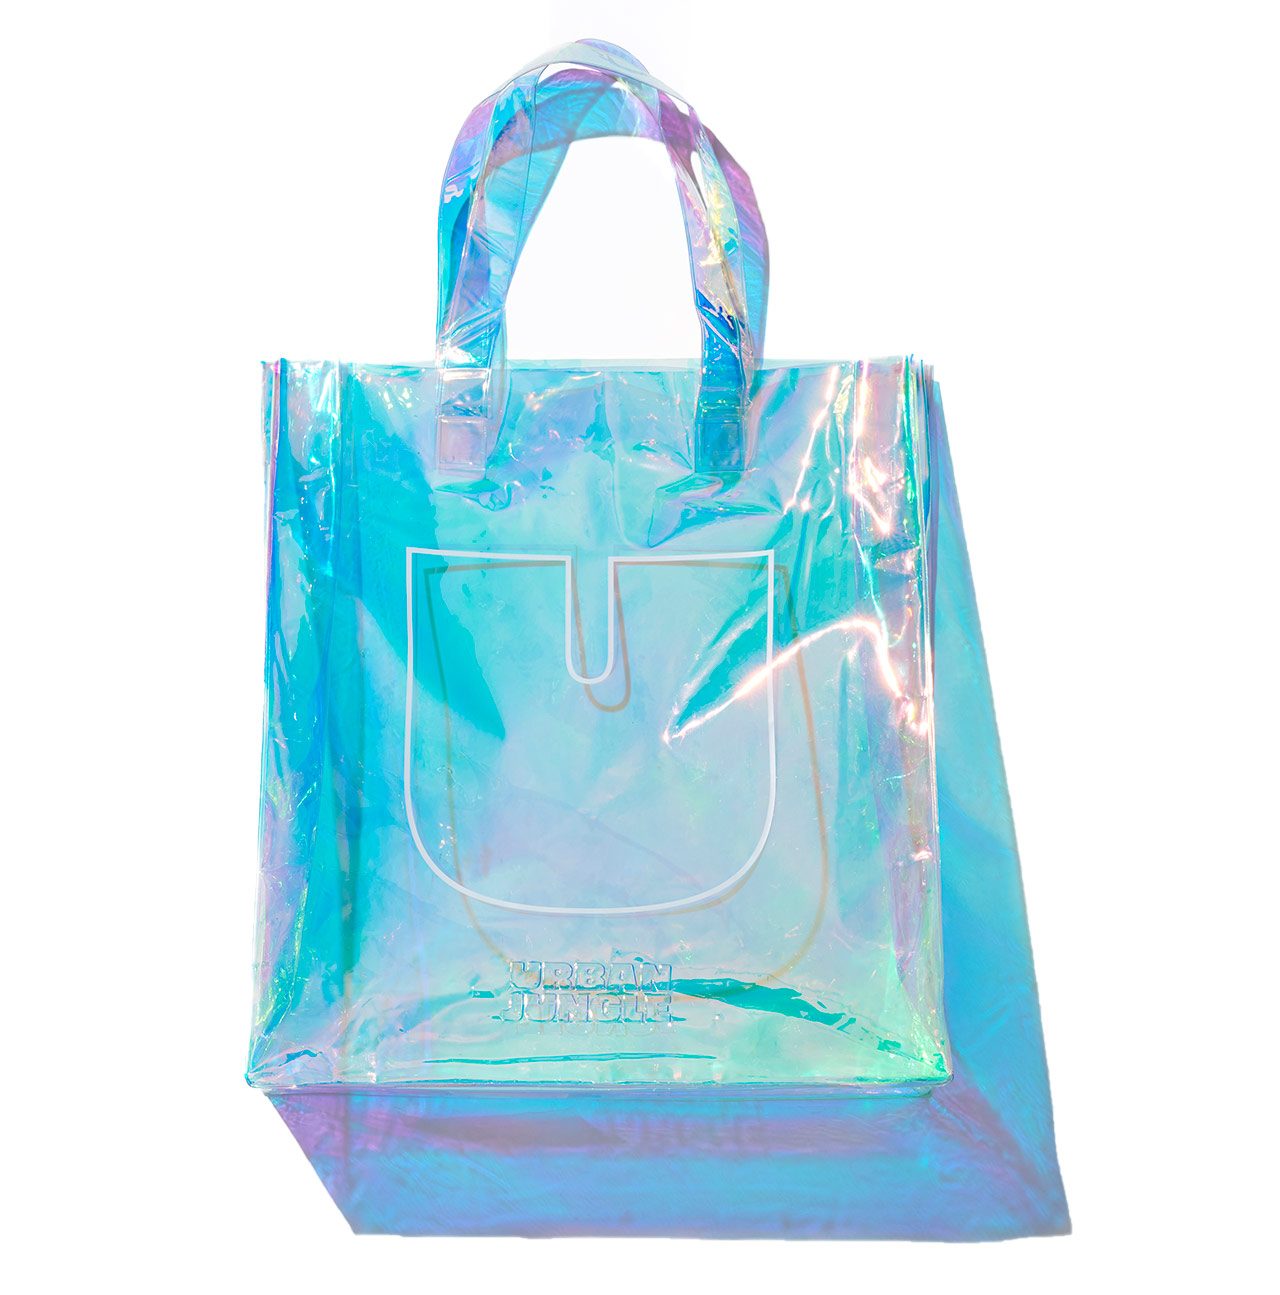 3pcs Holographic Clear Plastic Small Gift Bag for Party (8.5x8.1x4.1  inches) - Walmart.com